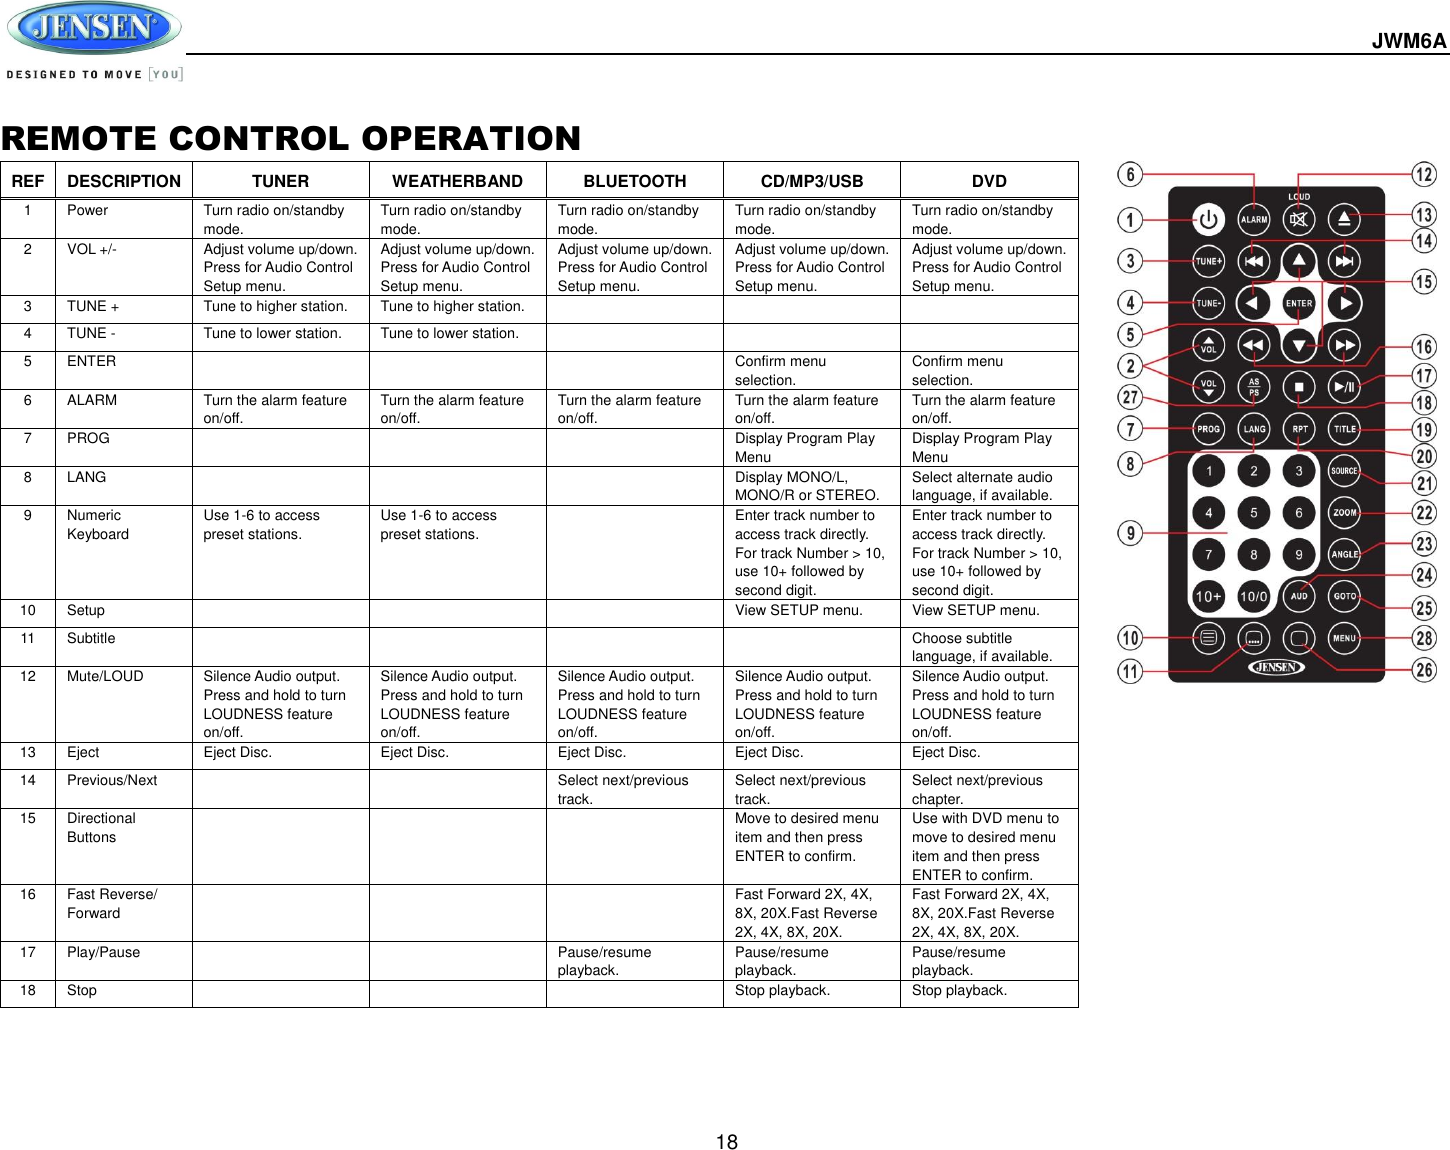  JWM6A  18 REMOTE CONTROL OPERATION REF DESCRIPTION TUNER WEATHERBAND BLUETOOTH CD/MP3/USB DVD 1 Power Turn radio on/standby mode. Turn radio on/standby mode. Turn radio on/standby mode. Turn radio on/standby mode. Turn radio on/standby mode. 2 VOL +/- Adjust volume up/down. Press for Audio Control Setup menu. Adjust volume up/down. Press for Audio Control Setup menu. Adjust volume up/down. Press for Audio Control Setup menu. Adjust volume up/down. Press for Audio Control Setup menu. Adjust volume up/down. Press for Audio Control Setup menu. 3 TUNE + Tune to higher station. Tune to higher station.    4 TUNE - Tune to lower station. Tune to lower station.    5 ENTER    Confirm menu selection.   Confirm menu selection. 6 ALARM Turn the alarm feature on/off. Turn the alarm feature on/off. Turn the alarm feature on/off. Turn the alarm feature on/off. Turn the alarm feature on/off. 7 PROG    Display Program Play Menu Display Program Play Menu 8 LANG    Display MONO/L, MONO/R or STEREO. Select alternate audio language, if available. 9 Numeric Keyboard Use 1-6 to access preset stations. Use 1-6 to access preset stations.  Enter track number to access track directly. For track Number &gt; 10, use 10+ followed by second digit. Enter track number to access track directly. For track Number &gt; 10, use 10+ followed by second digit. 10 Setup    View SETUP menu. View SETUP menu. 11 Subtitle     Choose subtitle language, if available. 12 Mute/LOUD Silence Audio output. Press and hold to turn LOUDNESS feature on/off. Silence Audio output. Press and hold to turn LOUDNESS feature on/off. Silence Audio output. Press and hold to turn LOUDNESS feature on/off. Silence Audio output. Press and hold to turn LOUDNESS feature on/off. Silence Audio output. Press and hold to turn LOUDNESS feature on/off. 13 Eject Eject Disc. Eject Disc. Eject Disc. Eject Disc. Eject Disc. 14 Previous/Next   Select next/previous track. Select next/previous track. Select next/previous chapter. 15 Directional Buttons    Move to desired menu item and then press ENTER to confirm. Use with DVD menu to move to desired menu item and then press ENTER to confirm. 16 Fast Reverse/ Forward    Fast Forward 2X, 4X, 8X, 20X.Fast Reverse 2X, 4X, 8X, 20X. Fast Forward 2X, 4X, 8X, 20X.Fast Reverse 2X, 4X, 8X, 20X. 17 Play/Pause   Pause/resume playback. Pause/resume playback. Pause/resume playback. 18 Stop    Stop playback. Stop playback. 